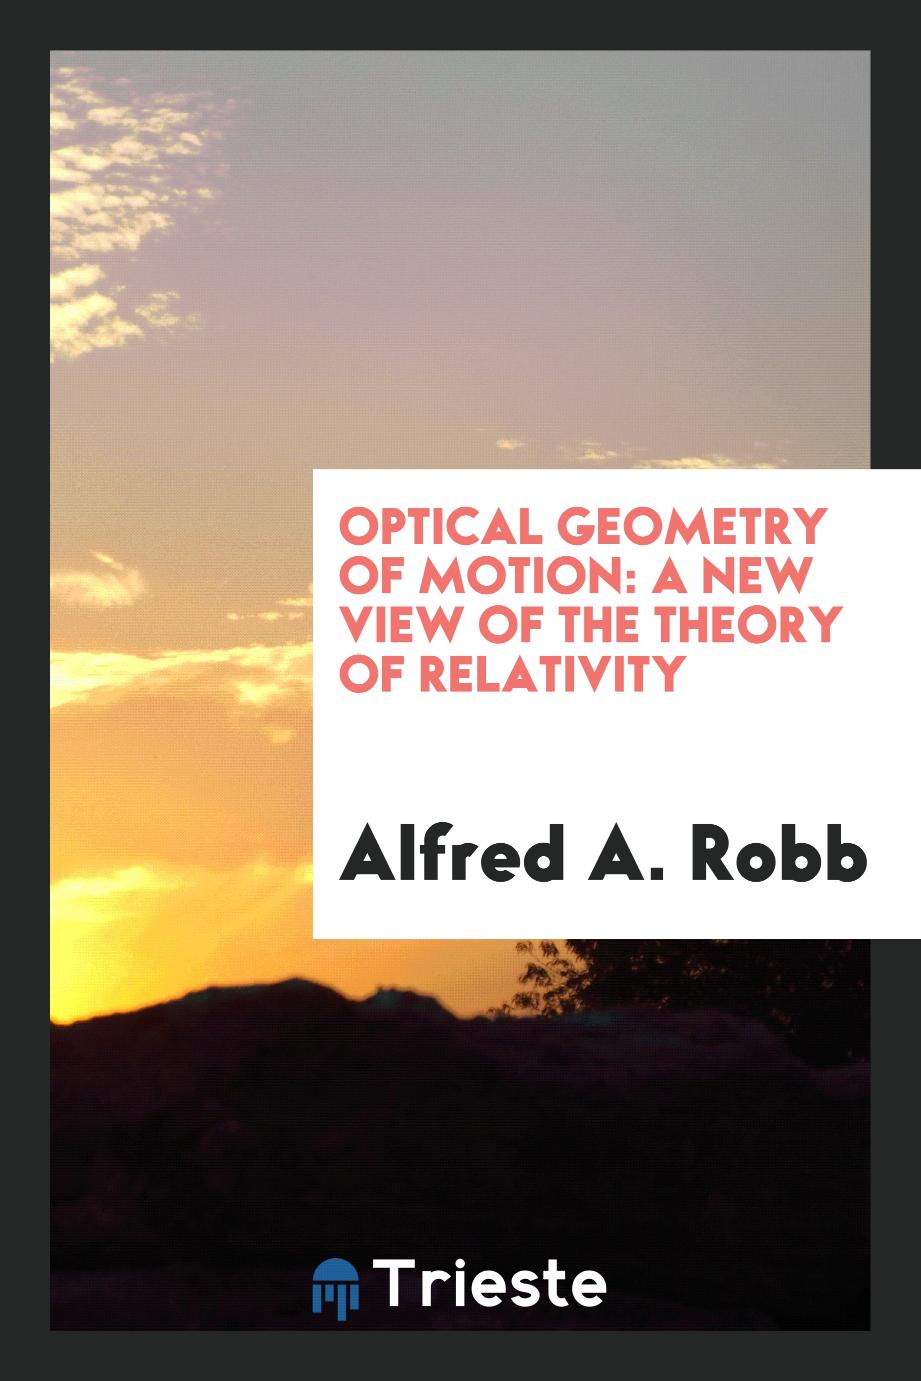 Optical Geometry of Motion: A New View of the Theory of Relativity